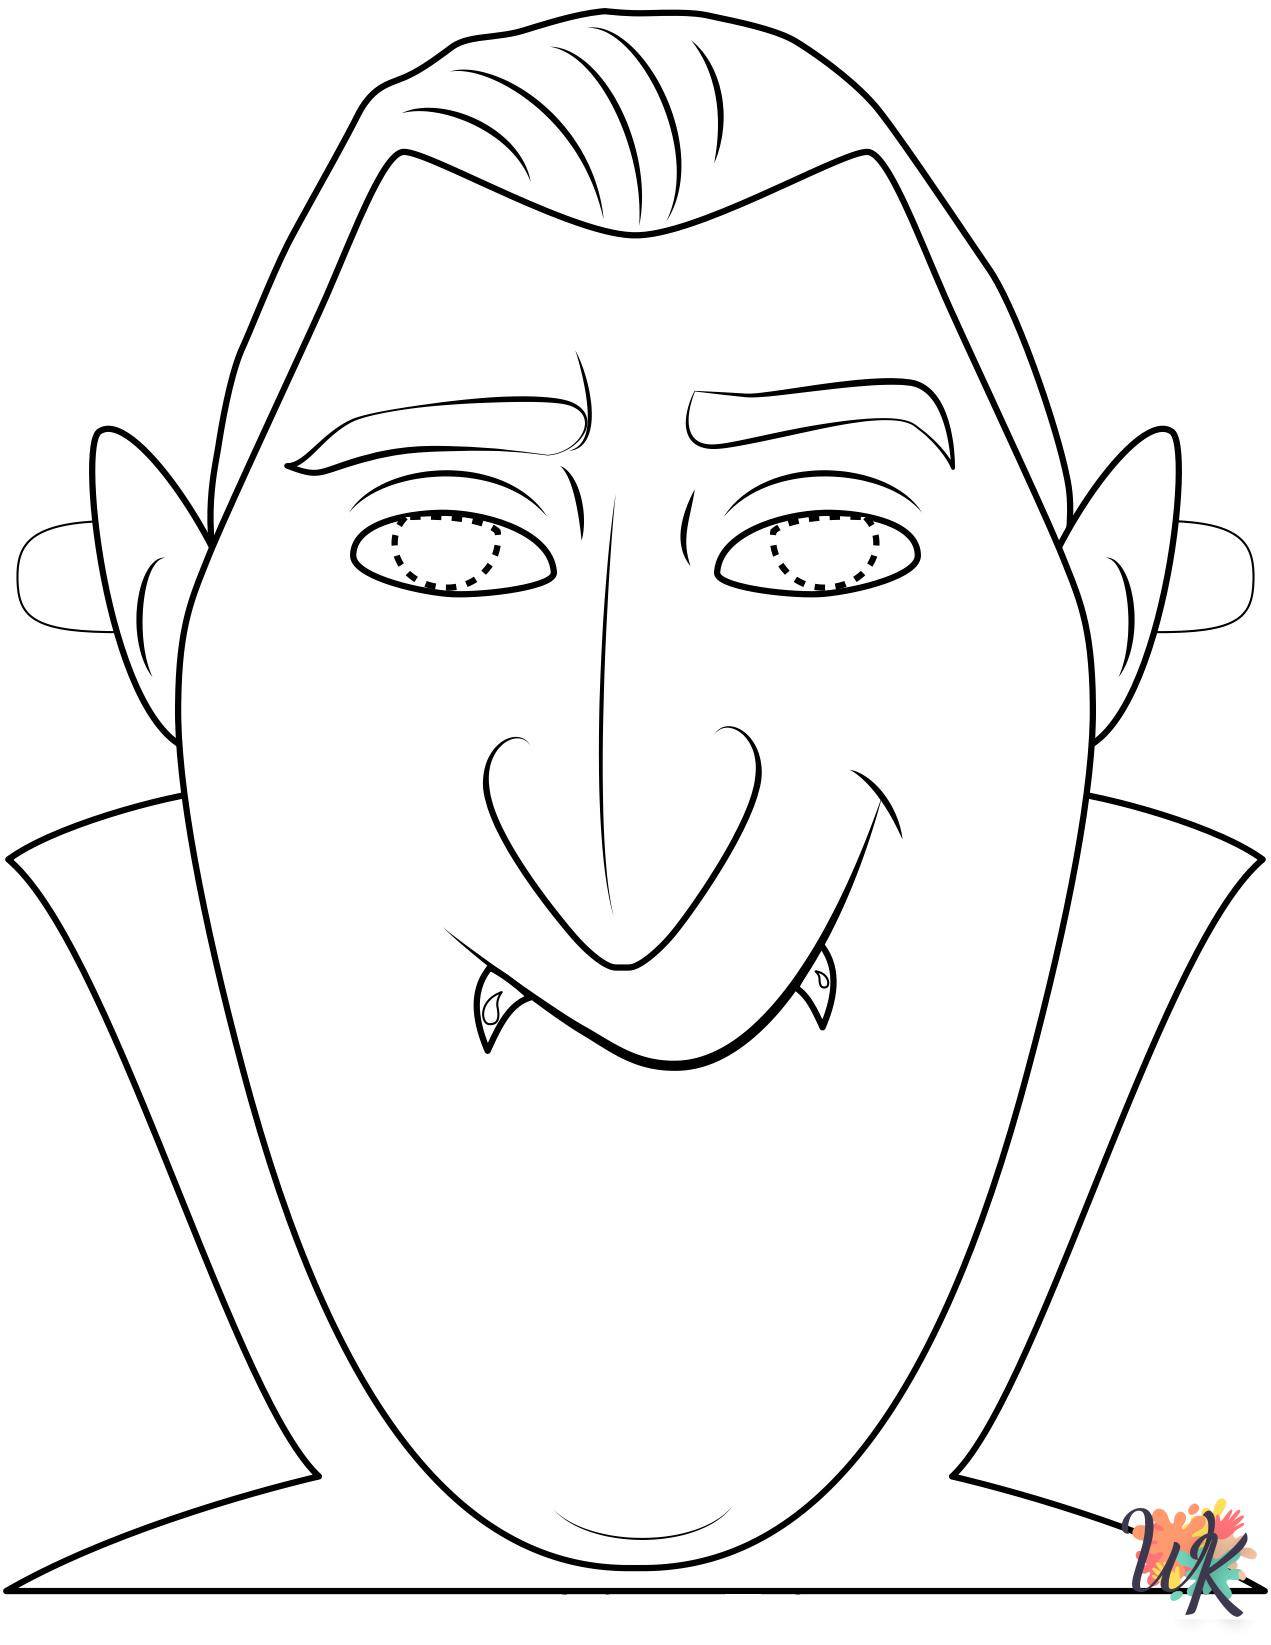 Dracula coloring pages easy